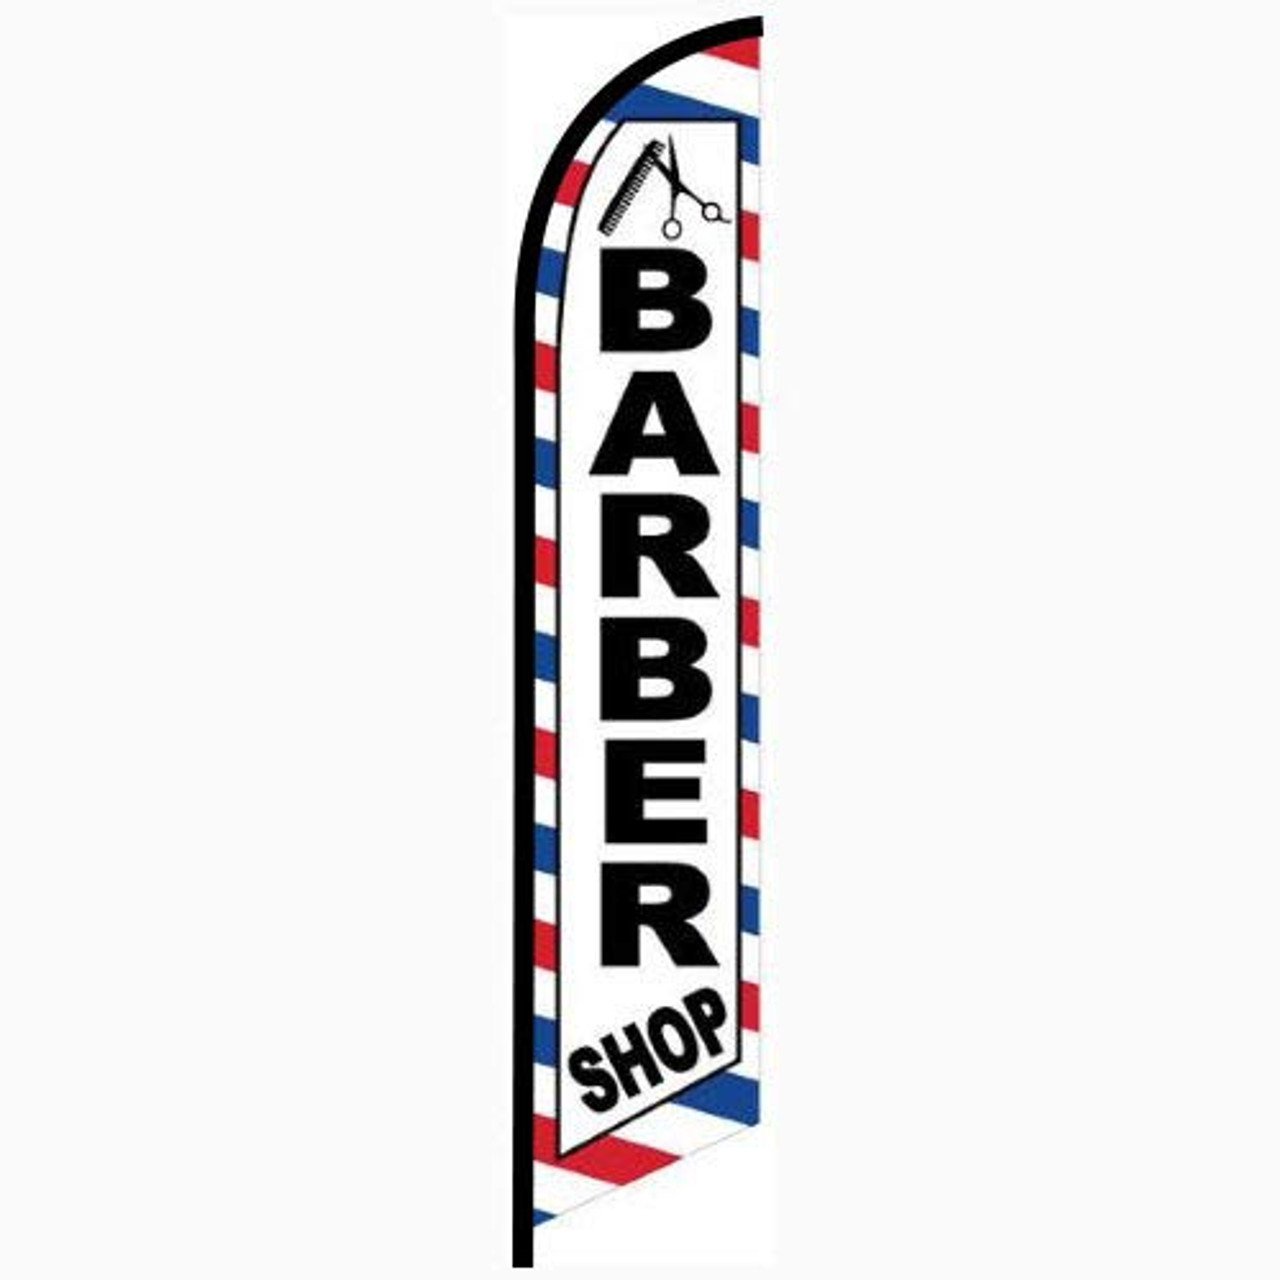 BEAUTY SUPPLY Hair Cut Barber Swooper Banner Feather Flutter Tall Curved Top Fla 